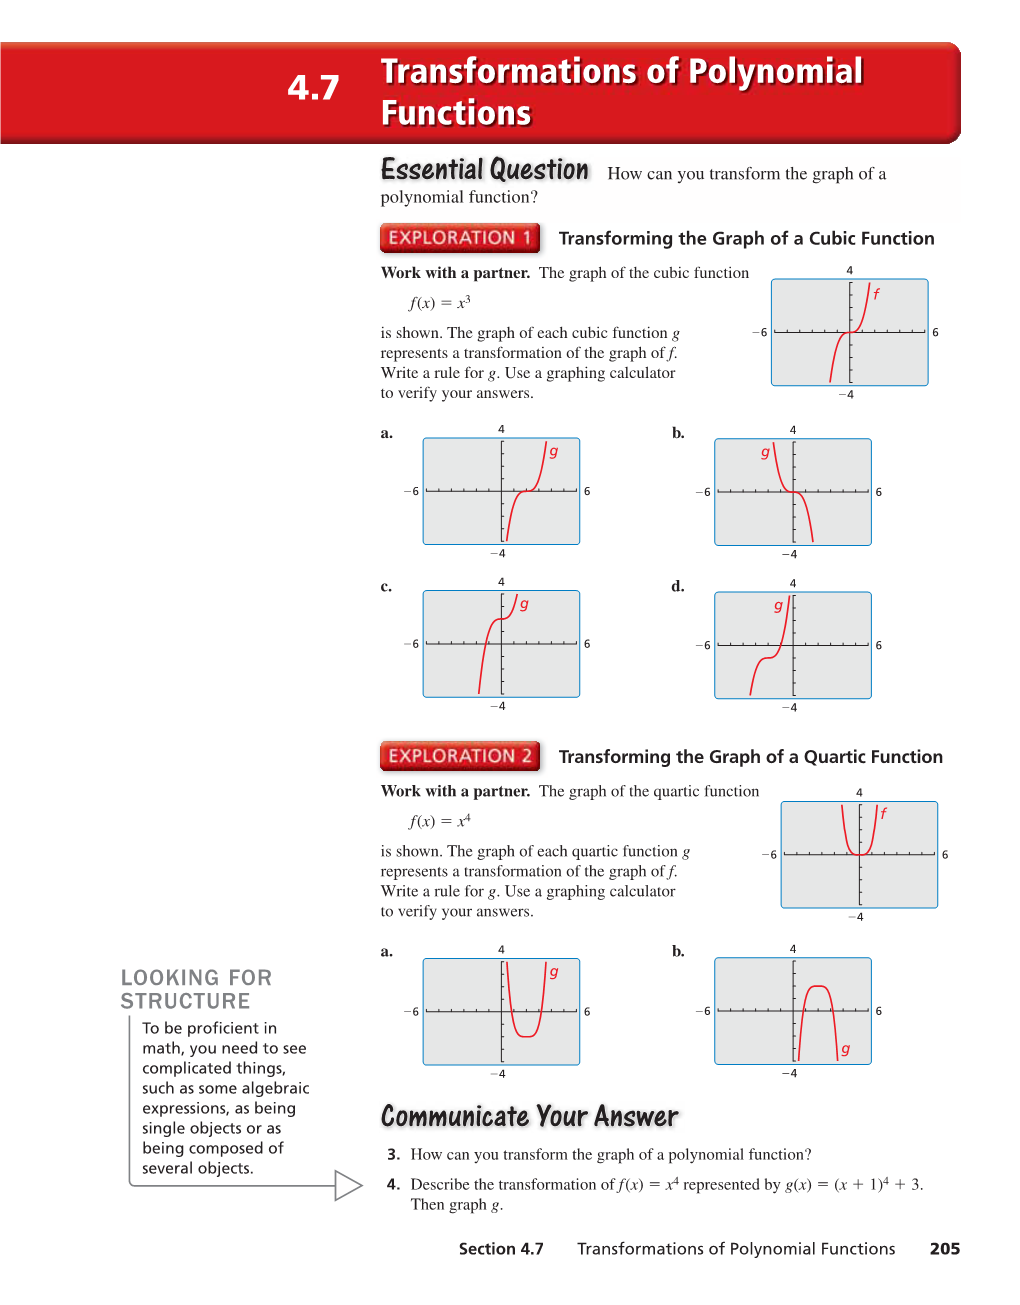 Transformations of Polynomial Functions